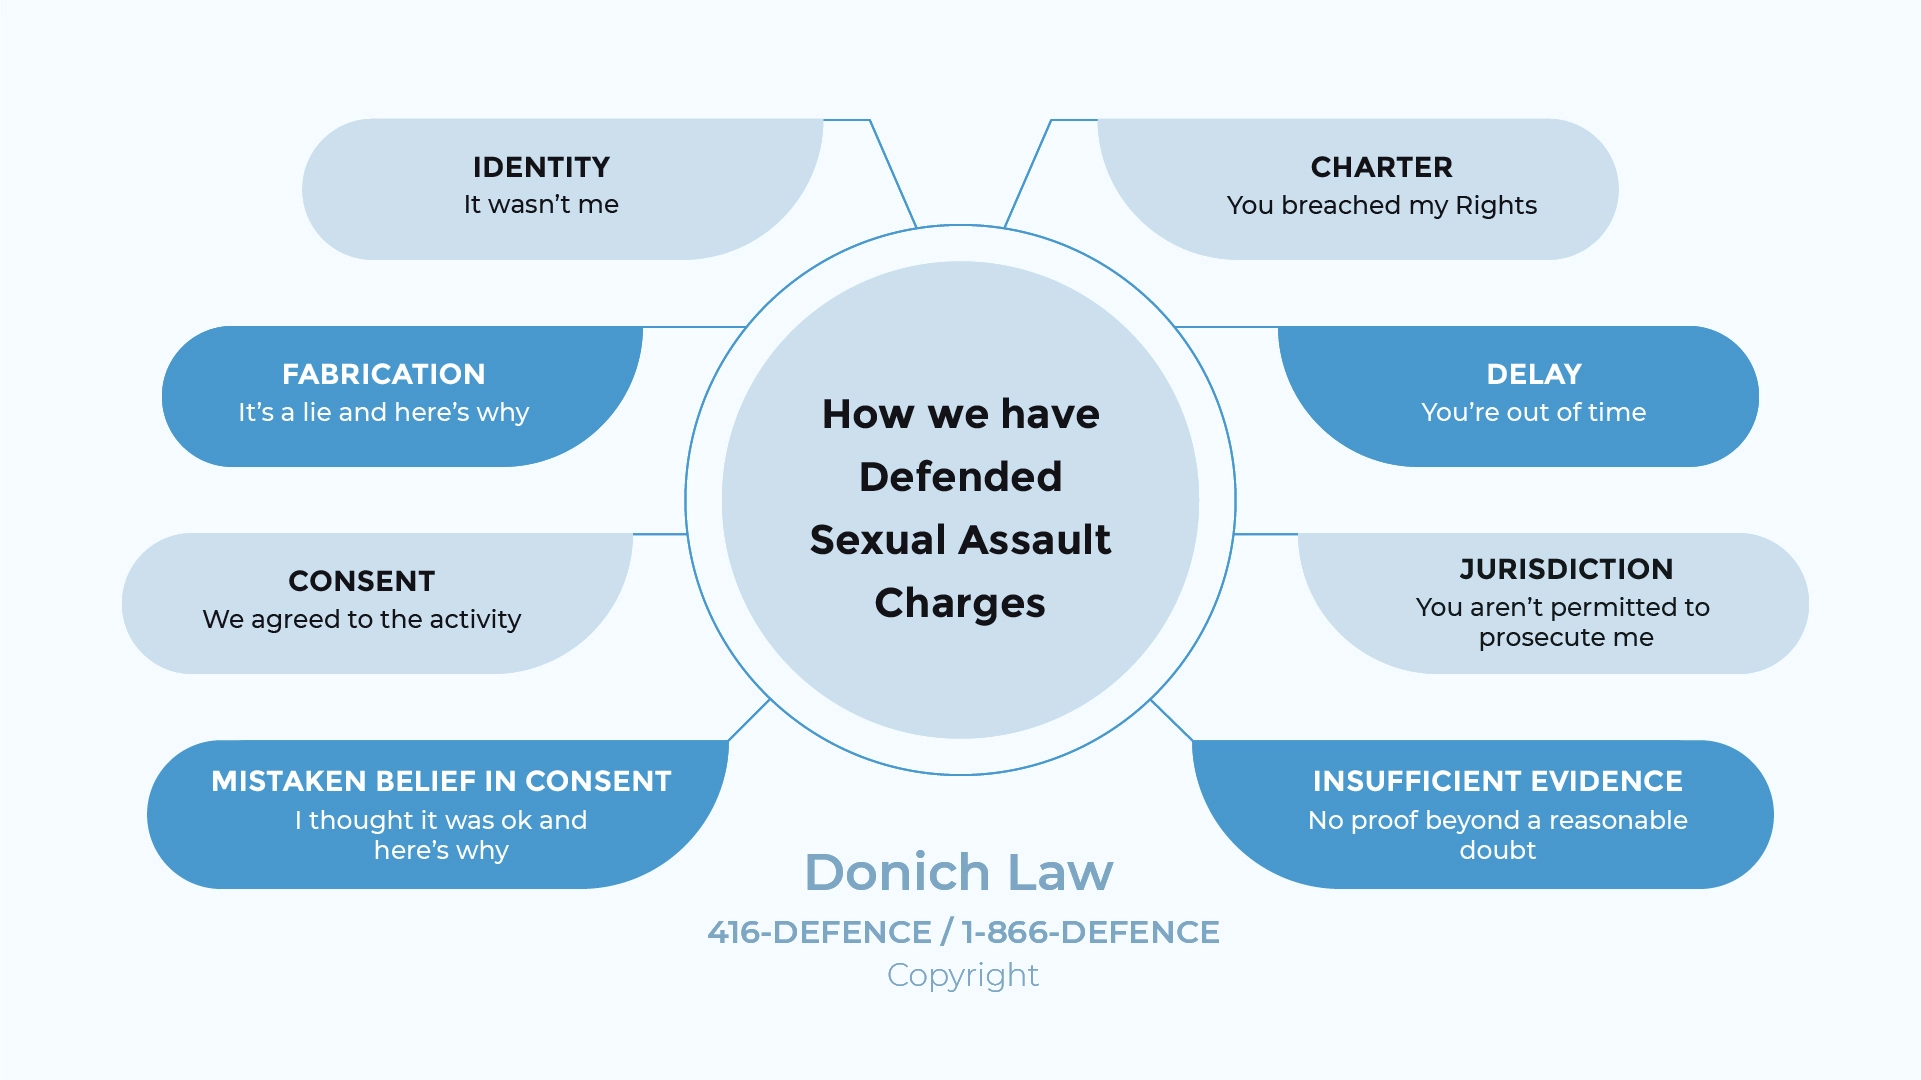 Donich Law - International Child Pornography Investigations we have Defended